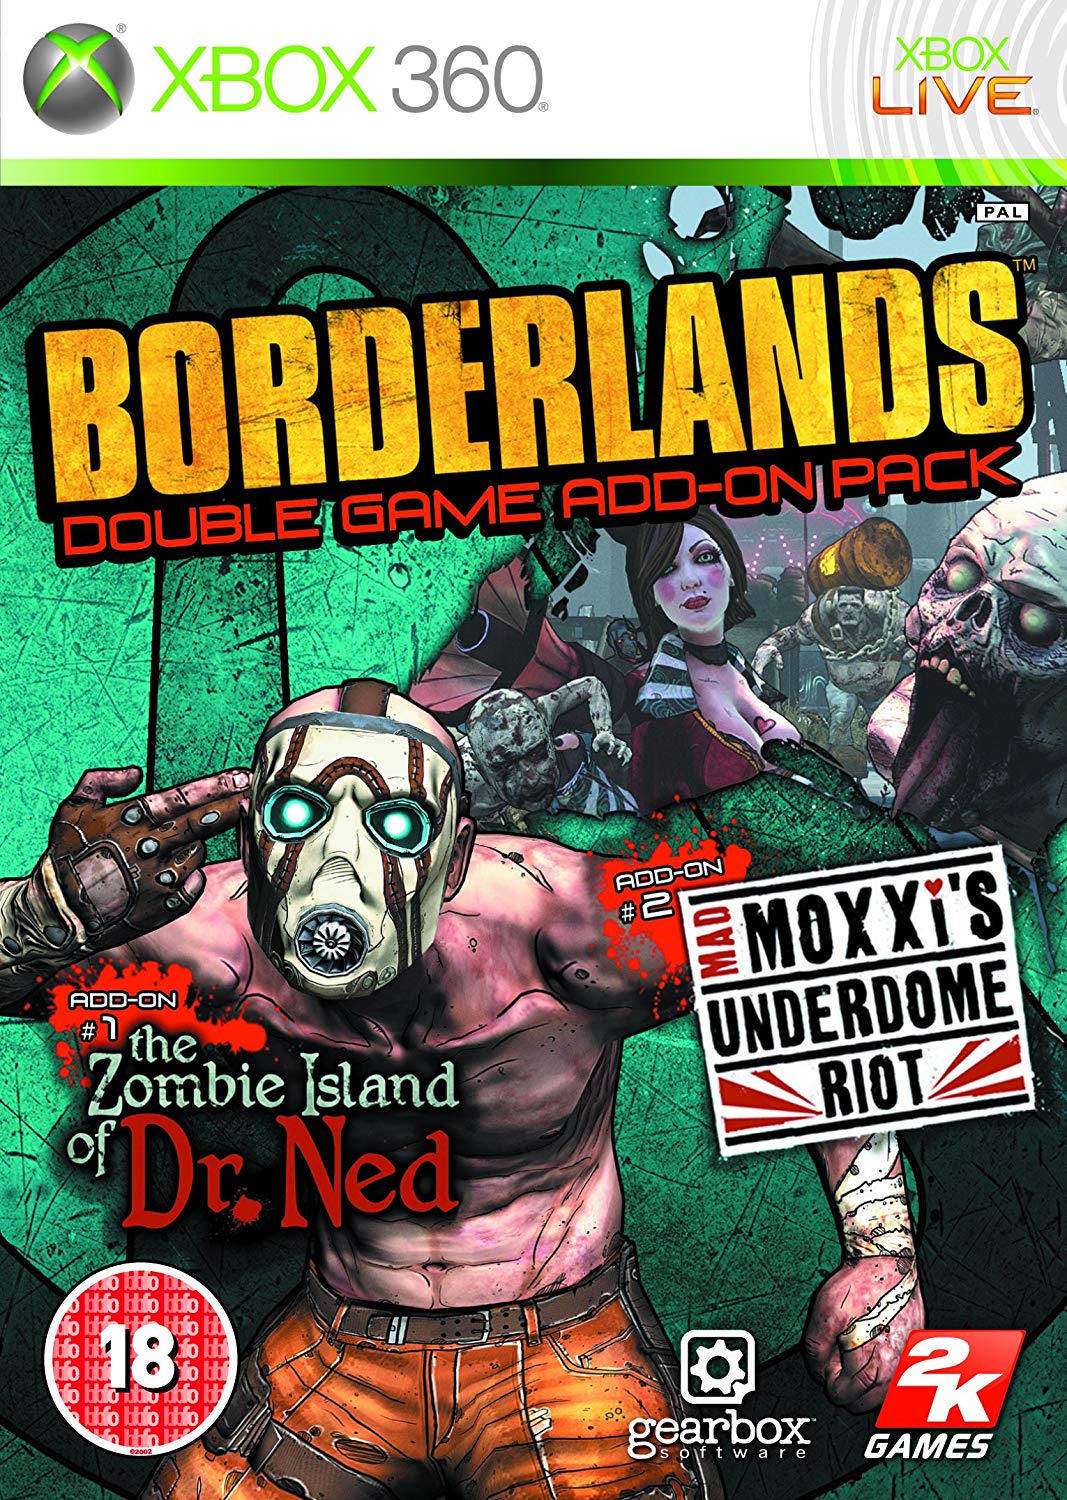 Borderlands Double Game Add-on Pack